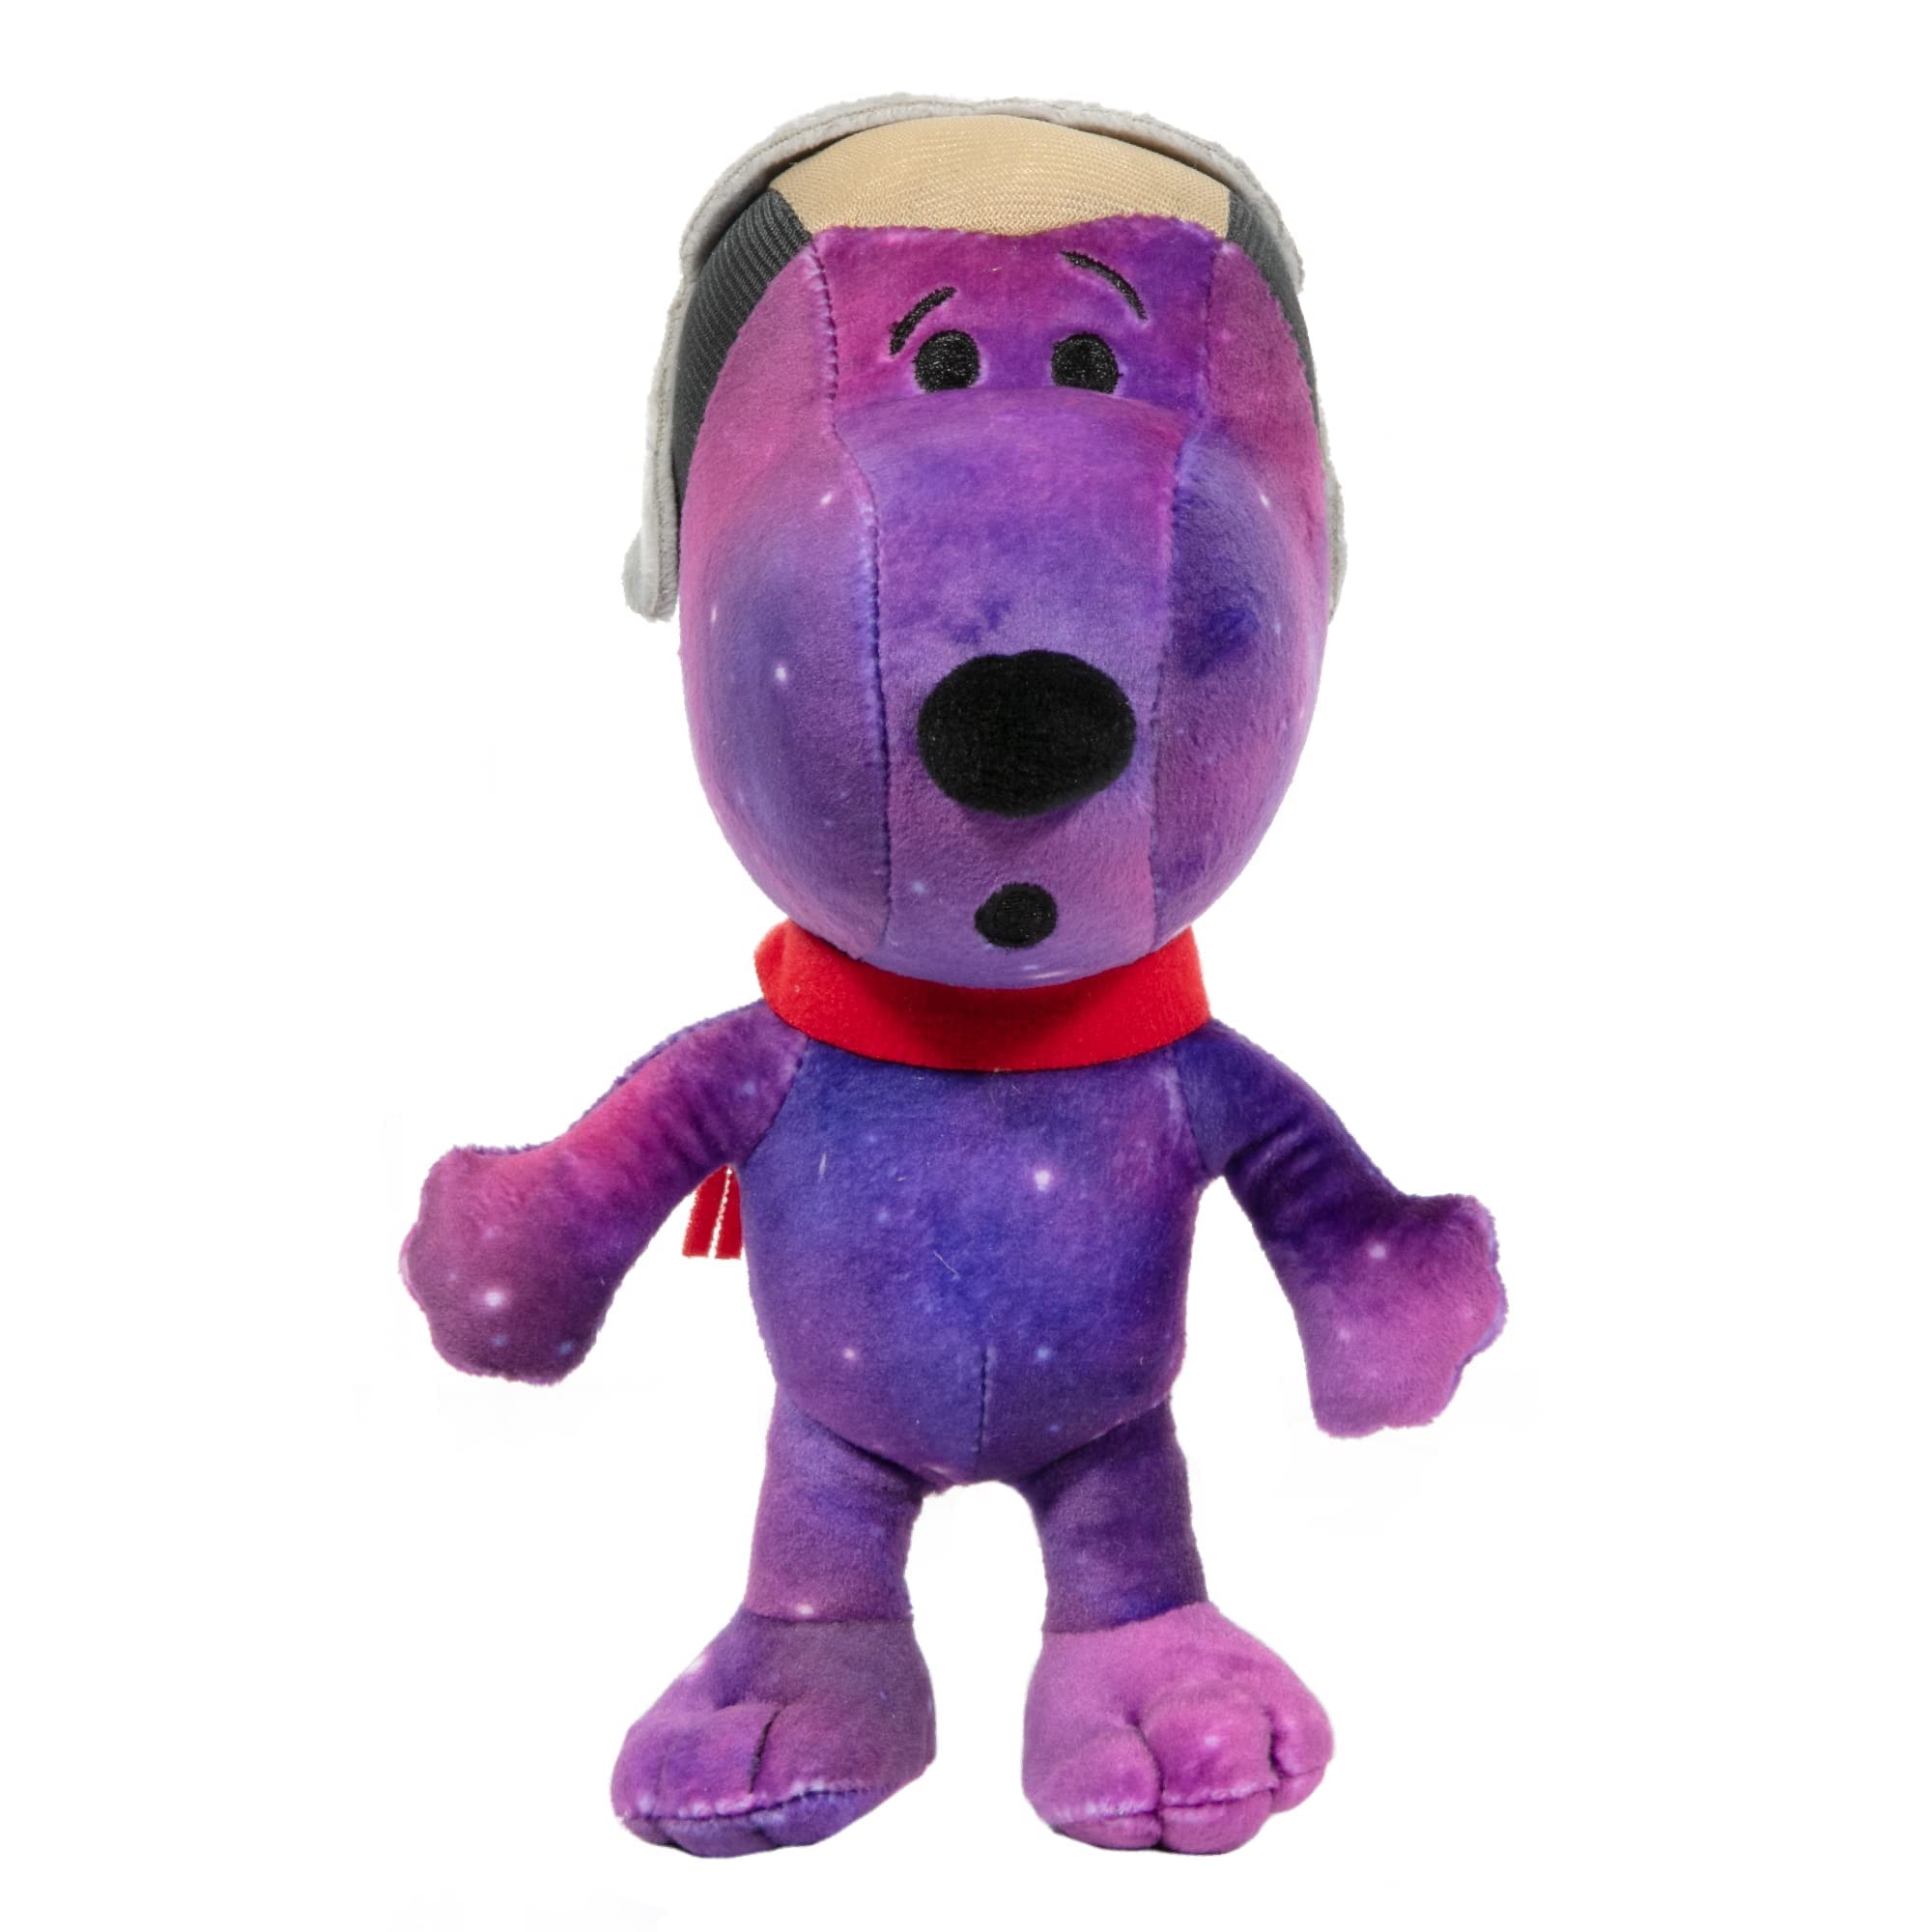 Jinx Official Peanuts Collectible Plush Snoopy, Excellent Plushie Toy for Toddlers & Preschool, Interstellar Nebula